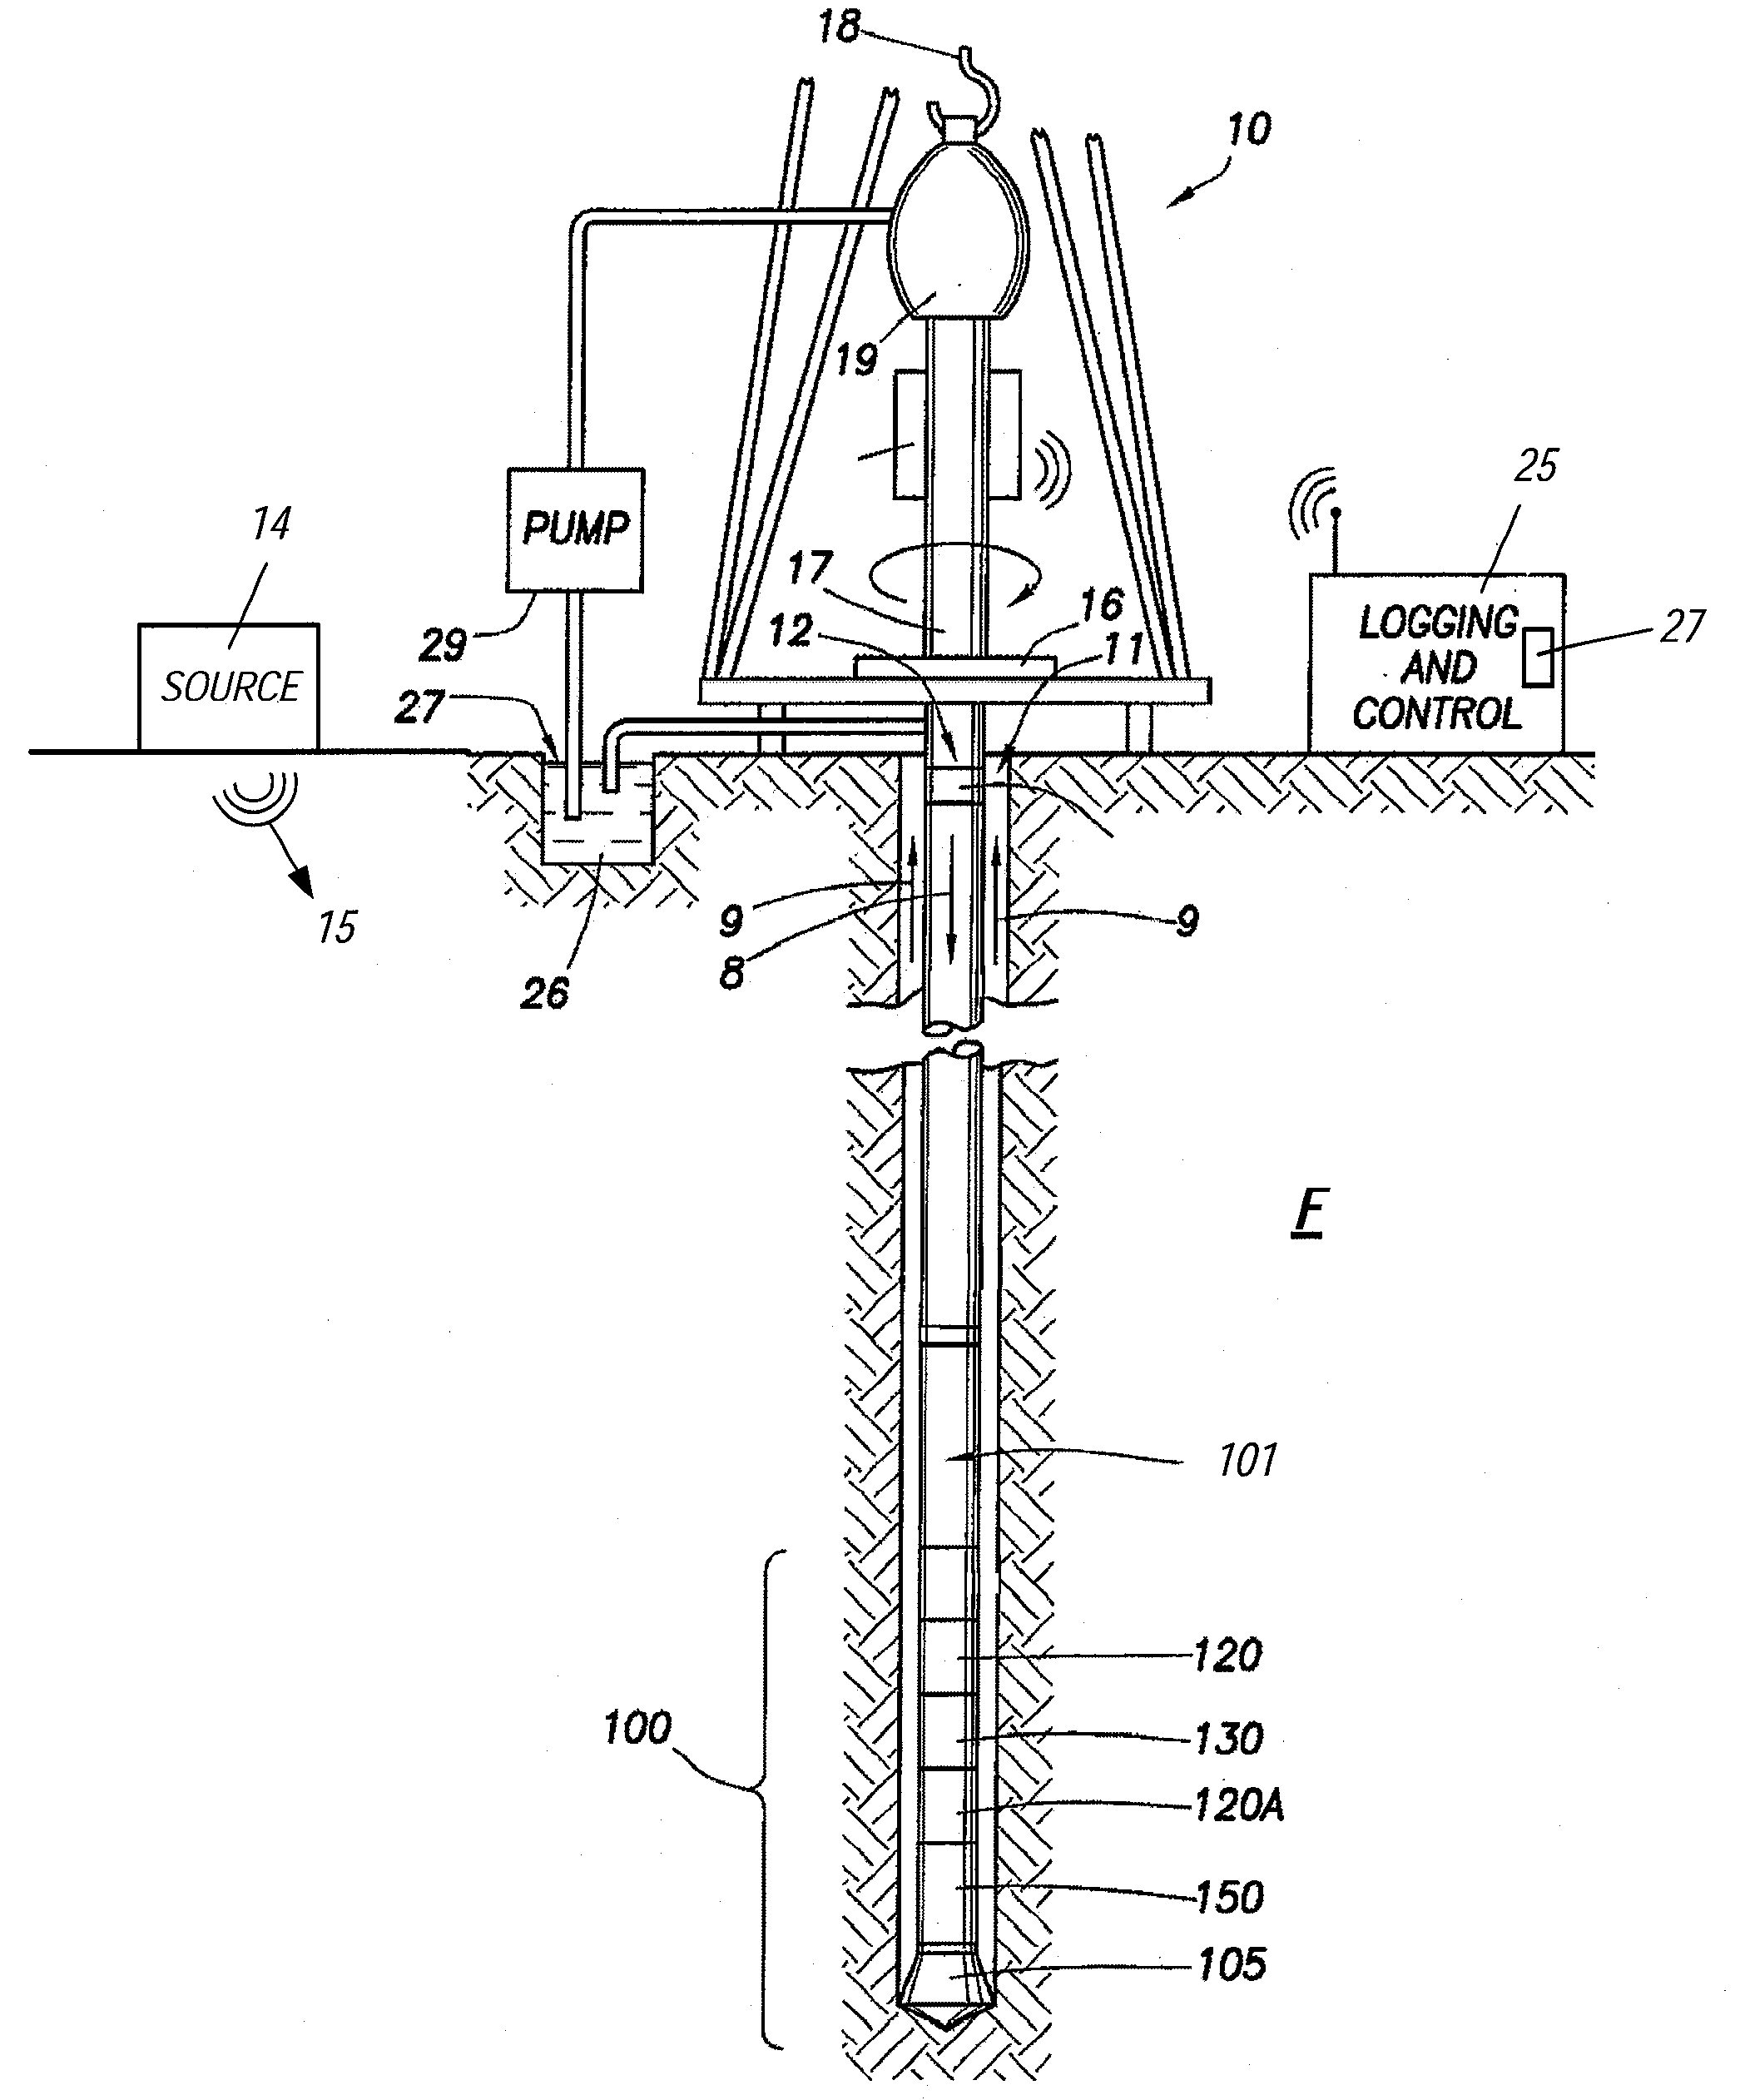 Method and apparatus for determining formation pararmeters using a seismic tool array